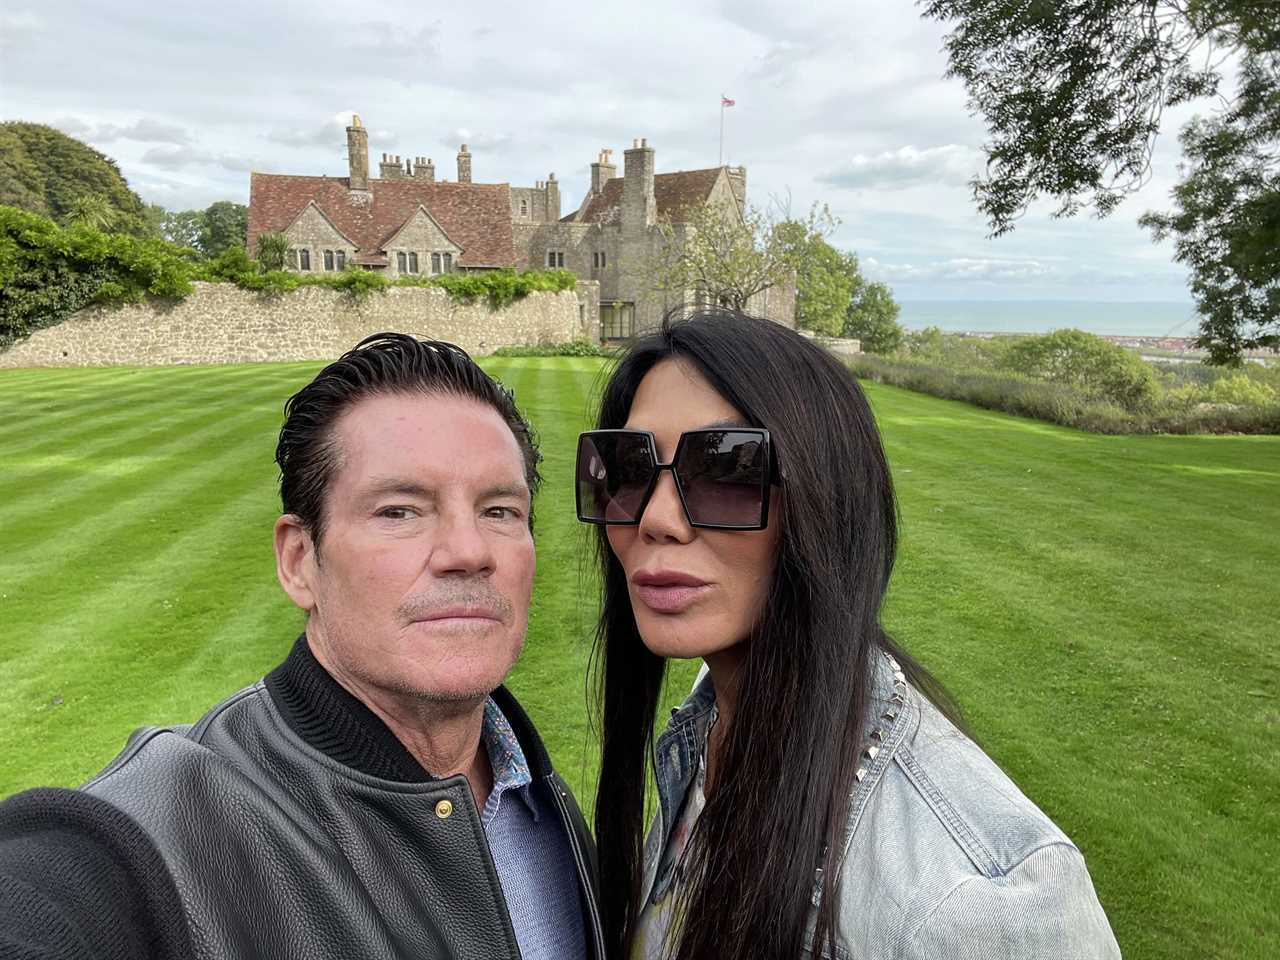 Real Housewives star splashes £11million on 1000-year-old Kent castle for new Escape to the Chateau style show